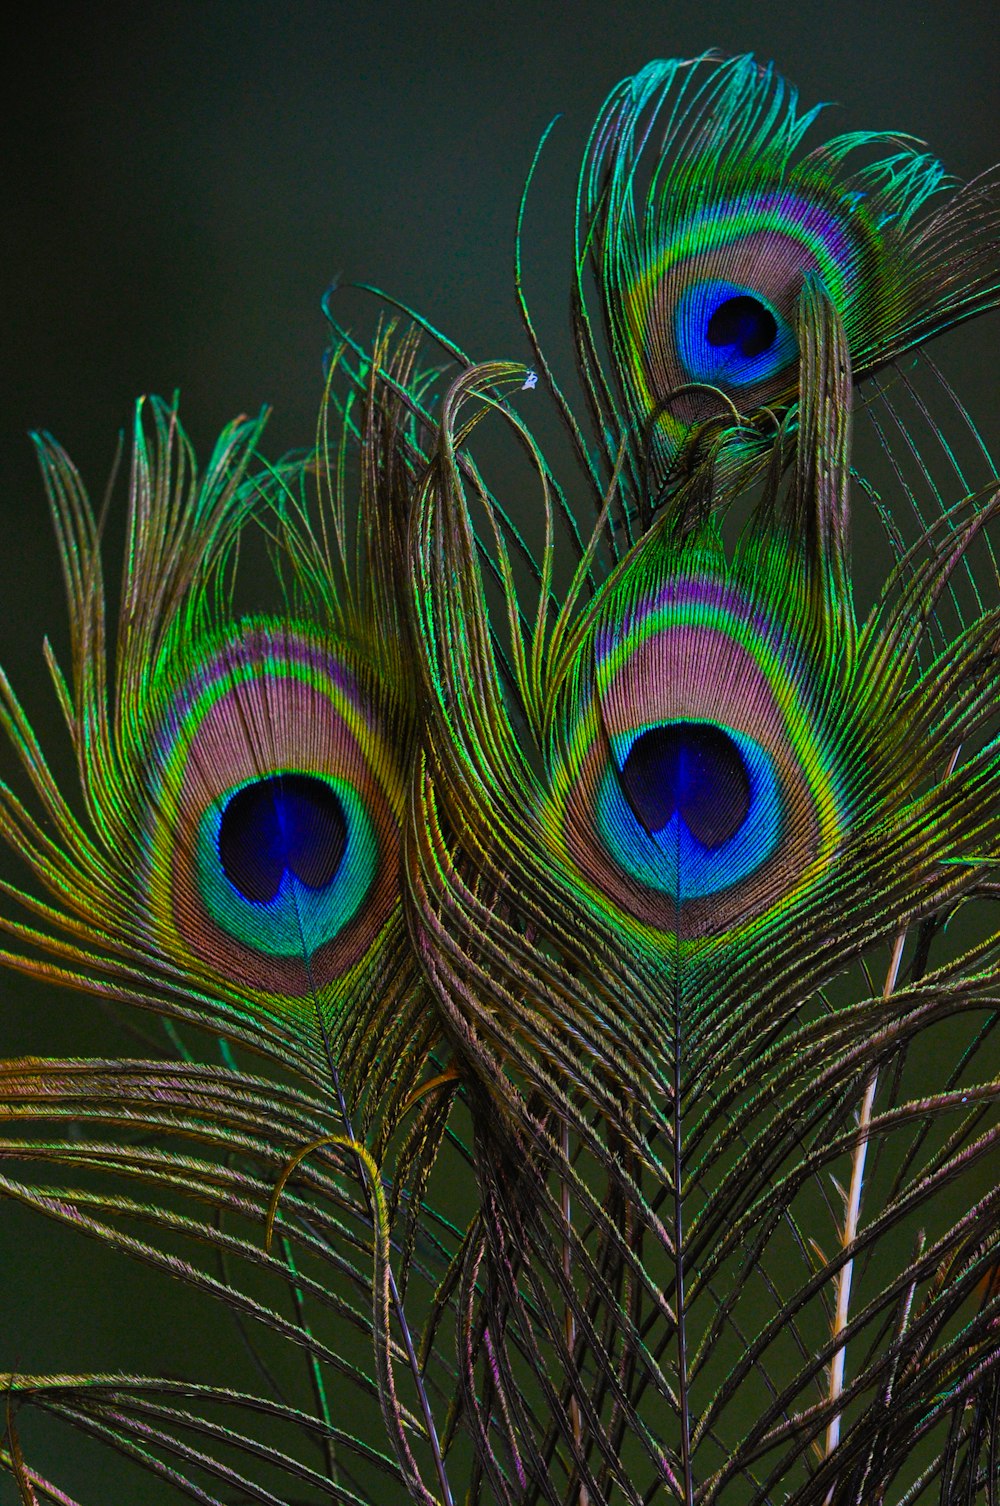 Peacock feather in close up photography photo – Free Peacock Image ...